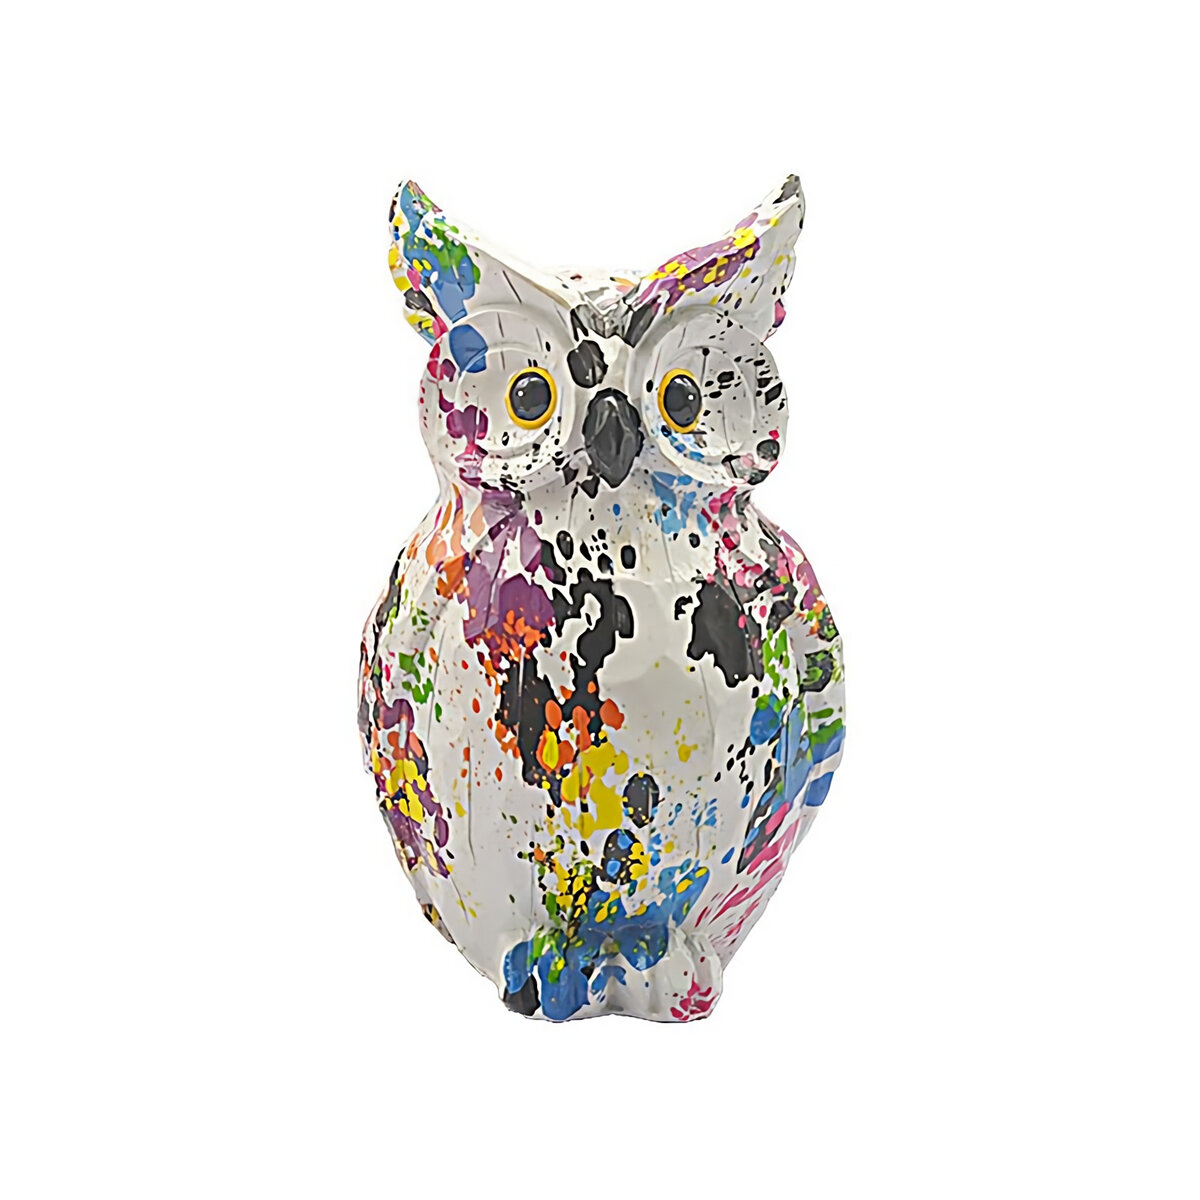 Colorful Owl Ornaments Creative Creative Art Animal Resin Crafts Home Office Desktop Decorations Acc